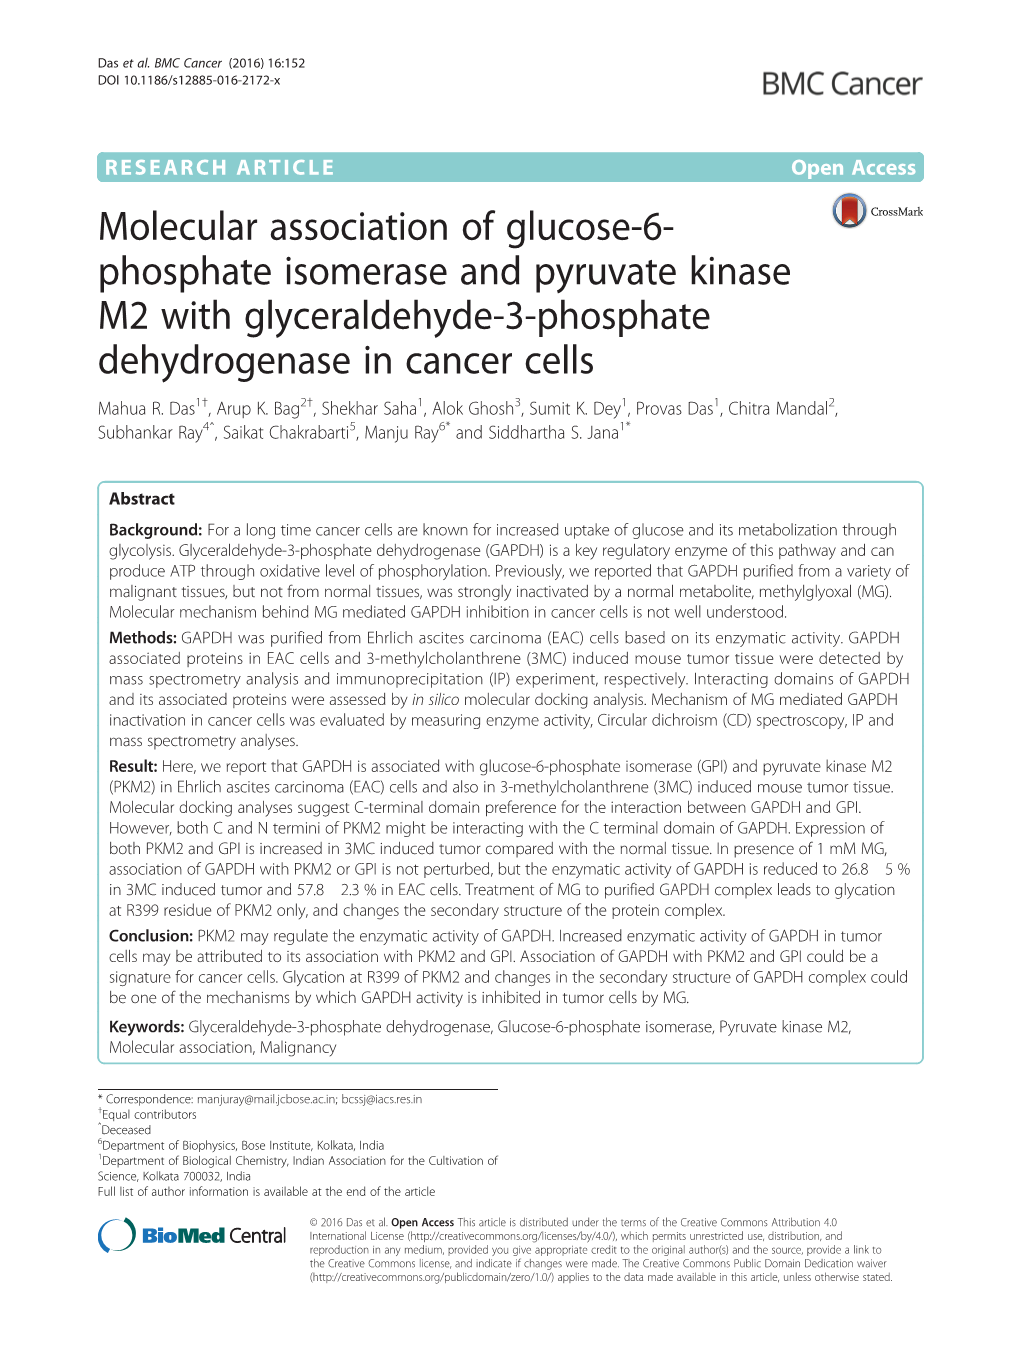 Phosphate Isomerase and Pyruvate Kinase M2 with Glyceraldehyde-3-Phosphate Dehydrogenase in Cancer Cells Mahua R